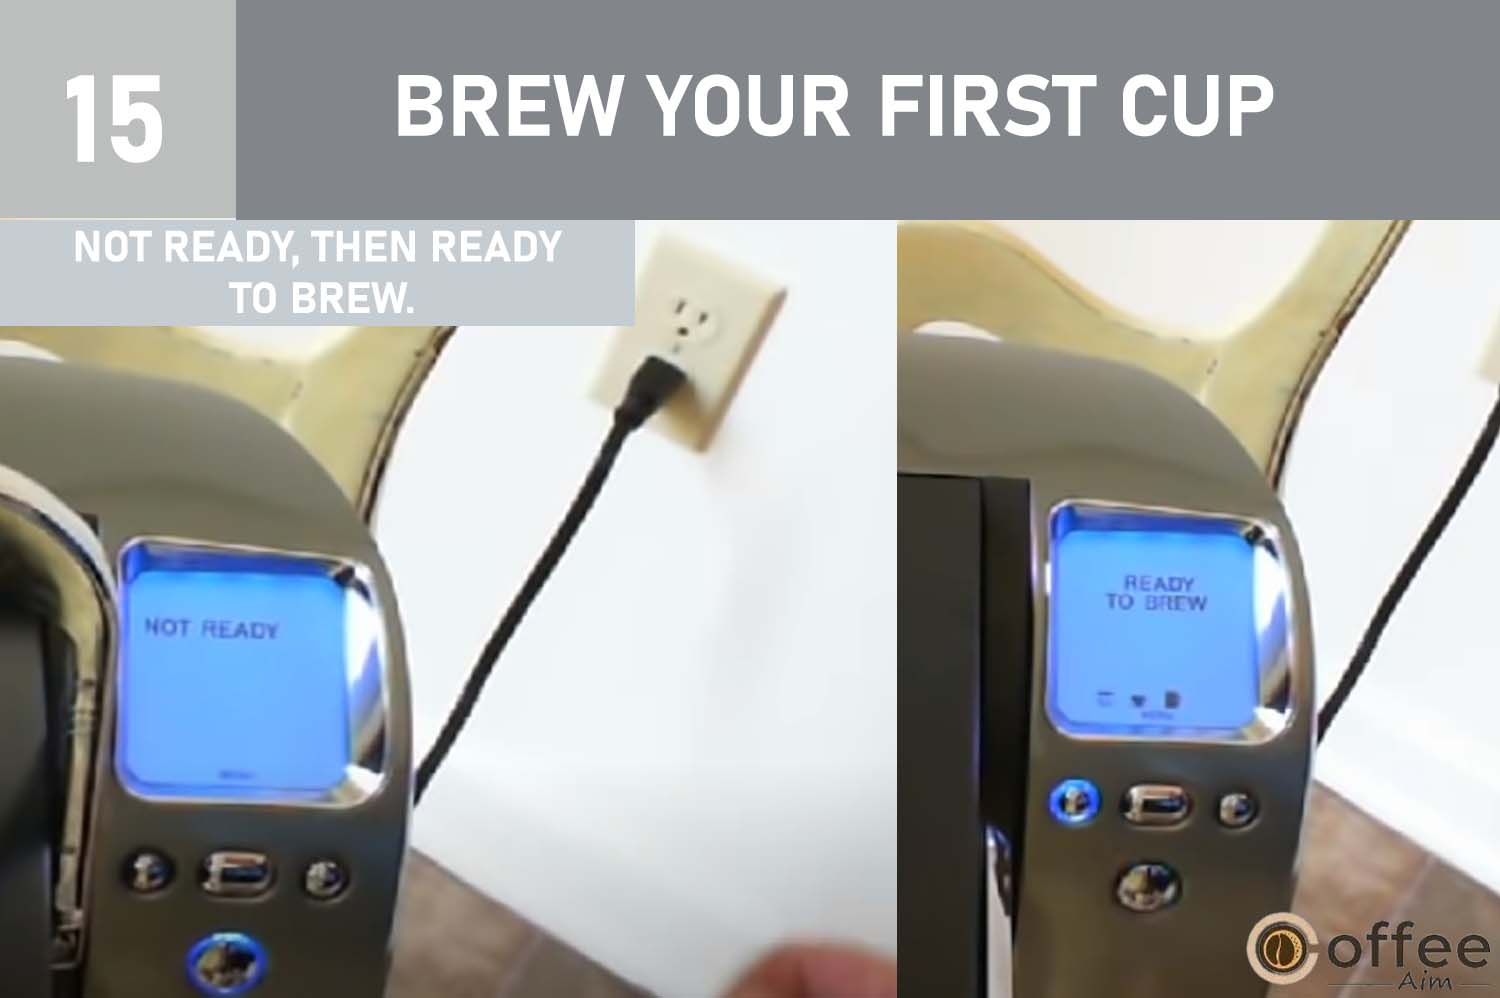 During the Brewer's water heating process, the LCD Control Center may display "NOT READY." After about 15 seconds, it changes to "READY TO BREW" when the water reaches the proper temperature.